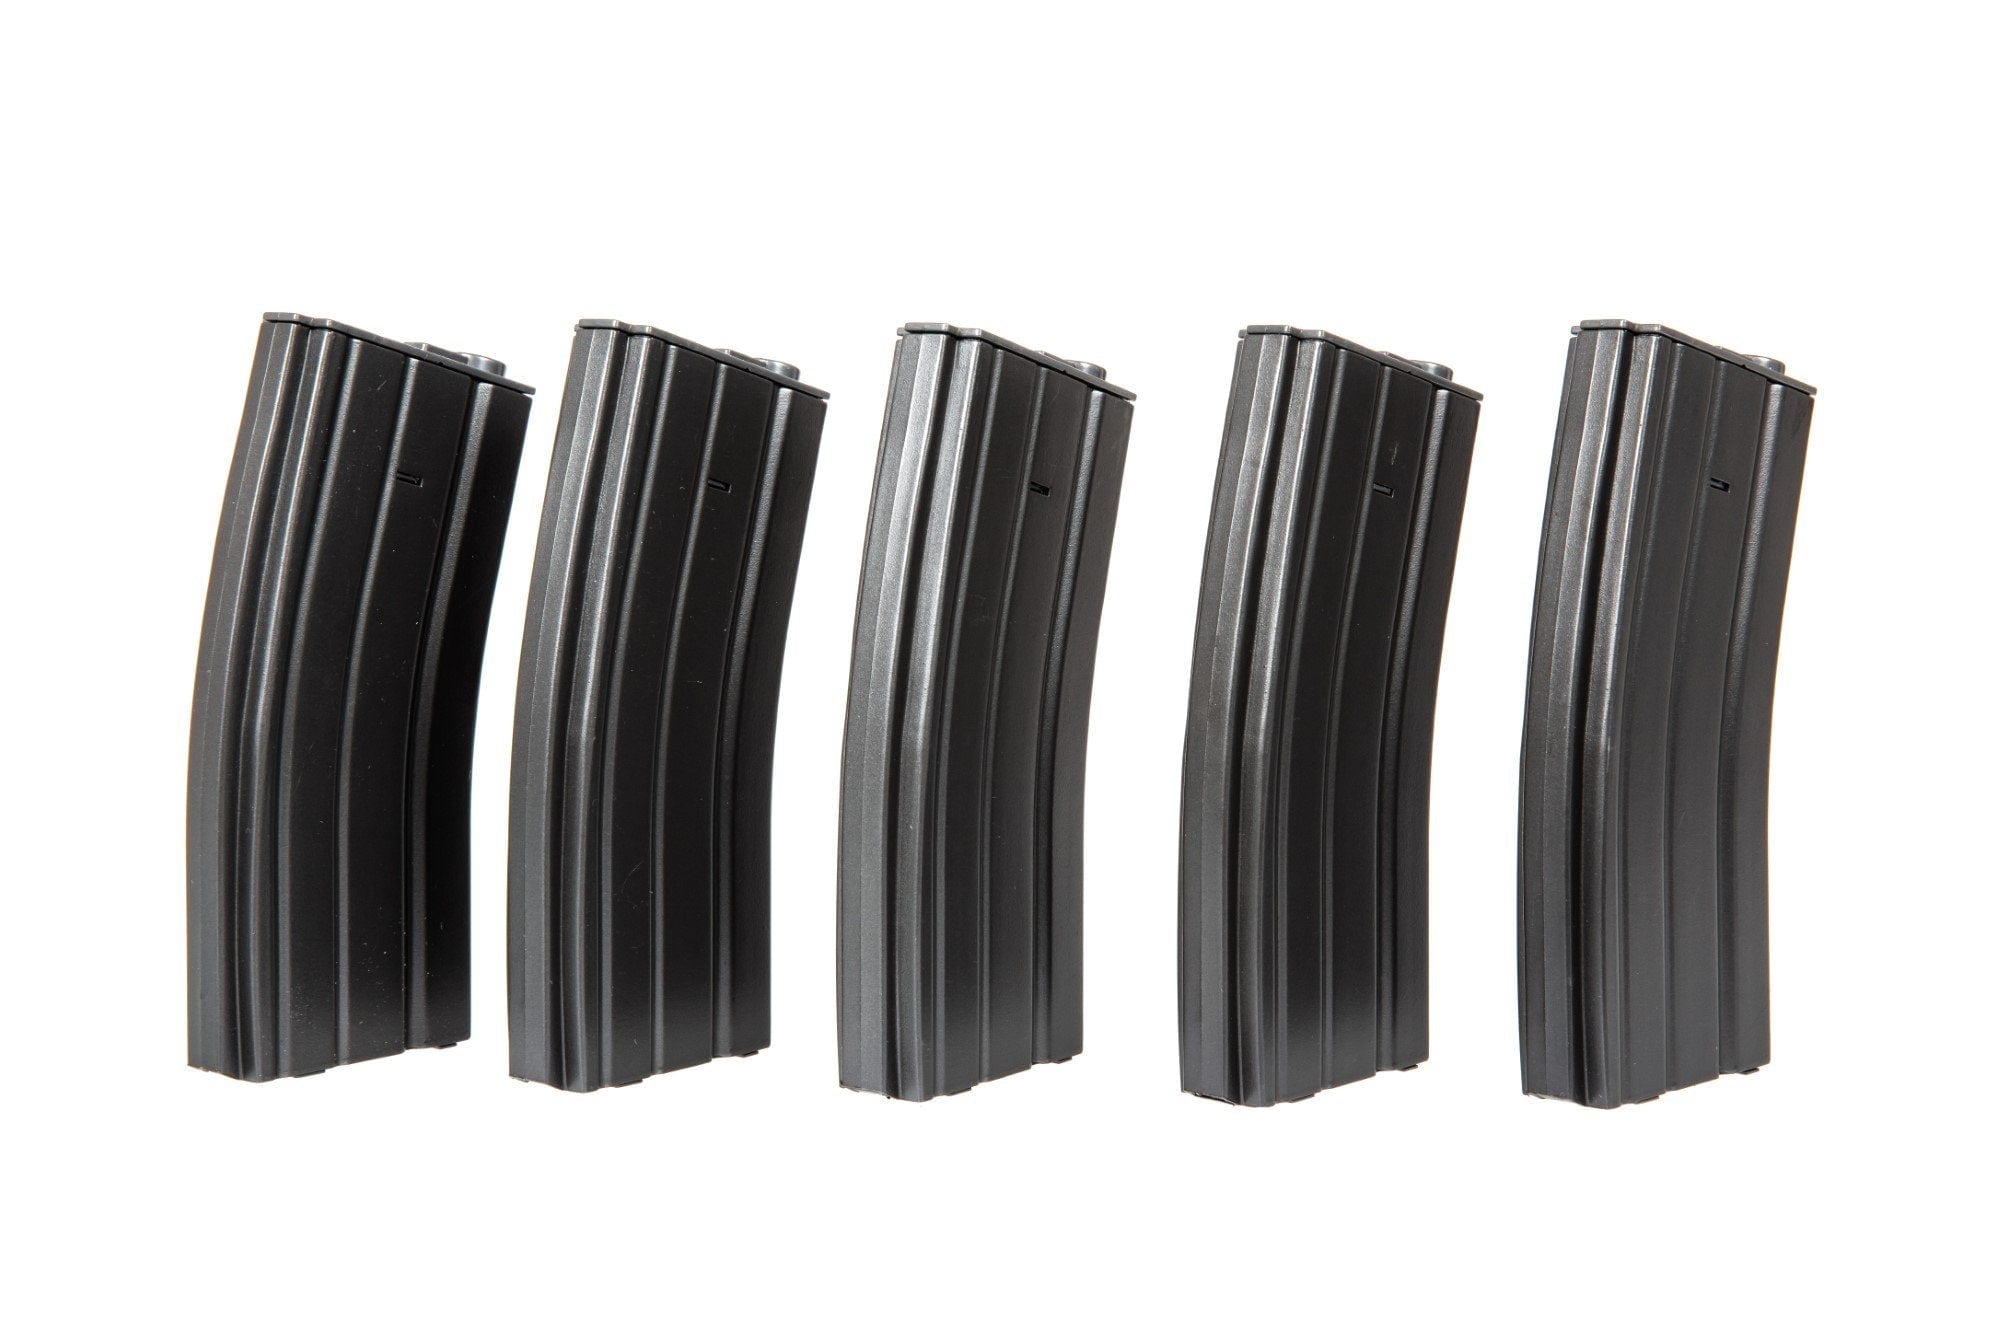 Set of 5 Mid-Cap 140 BB Magazines for M4 / M16 - Gray by Specna Arms on Airsoft Mania Europe